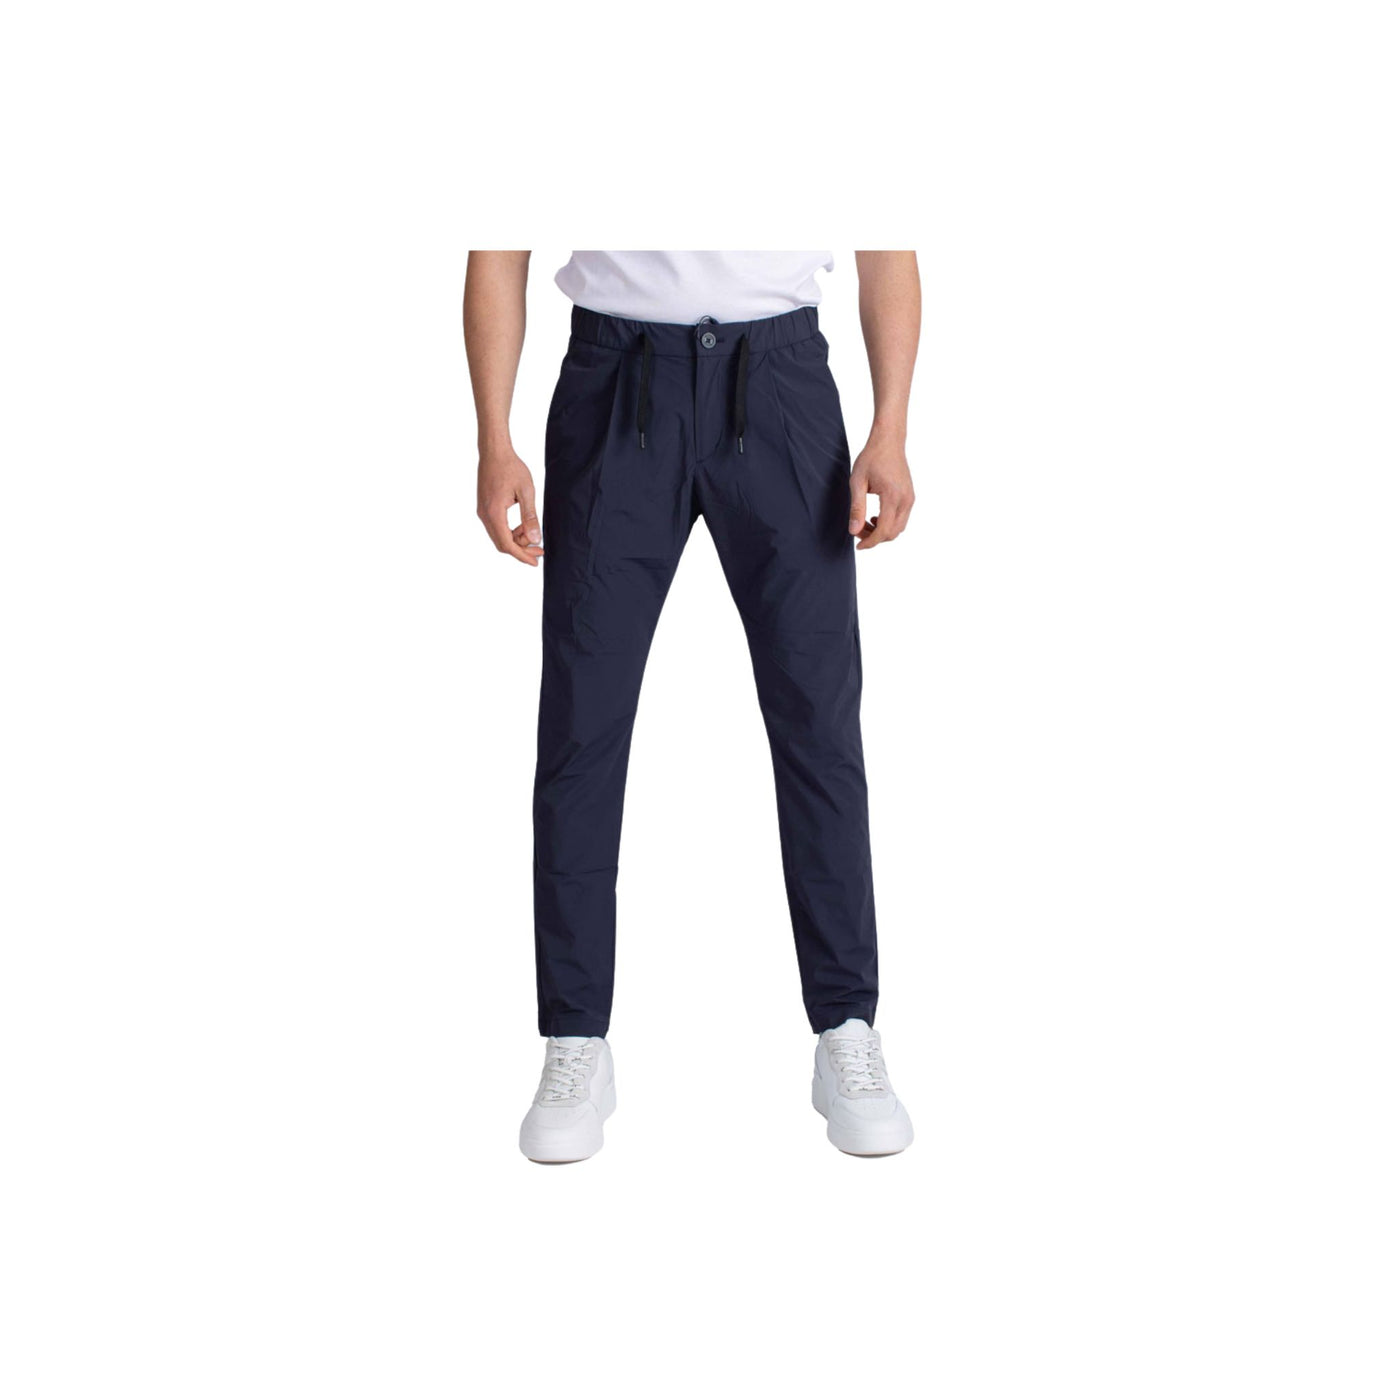 Men's trousers with drawstring in solid color